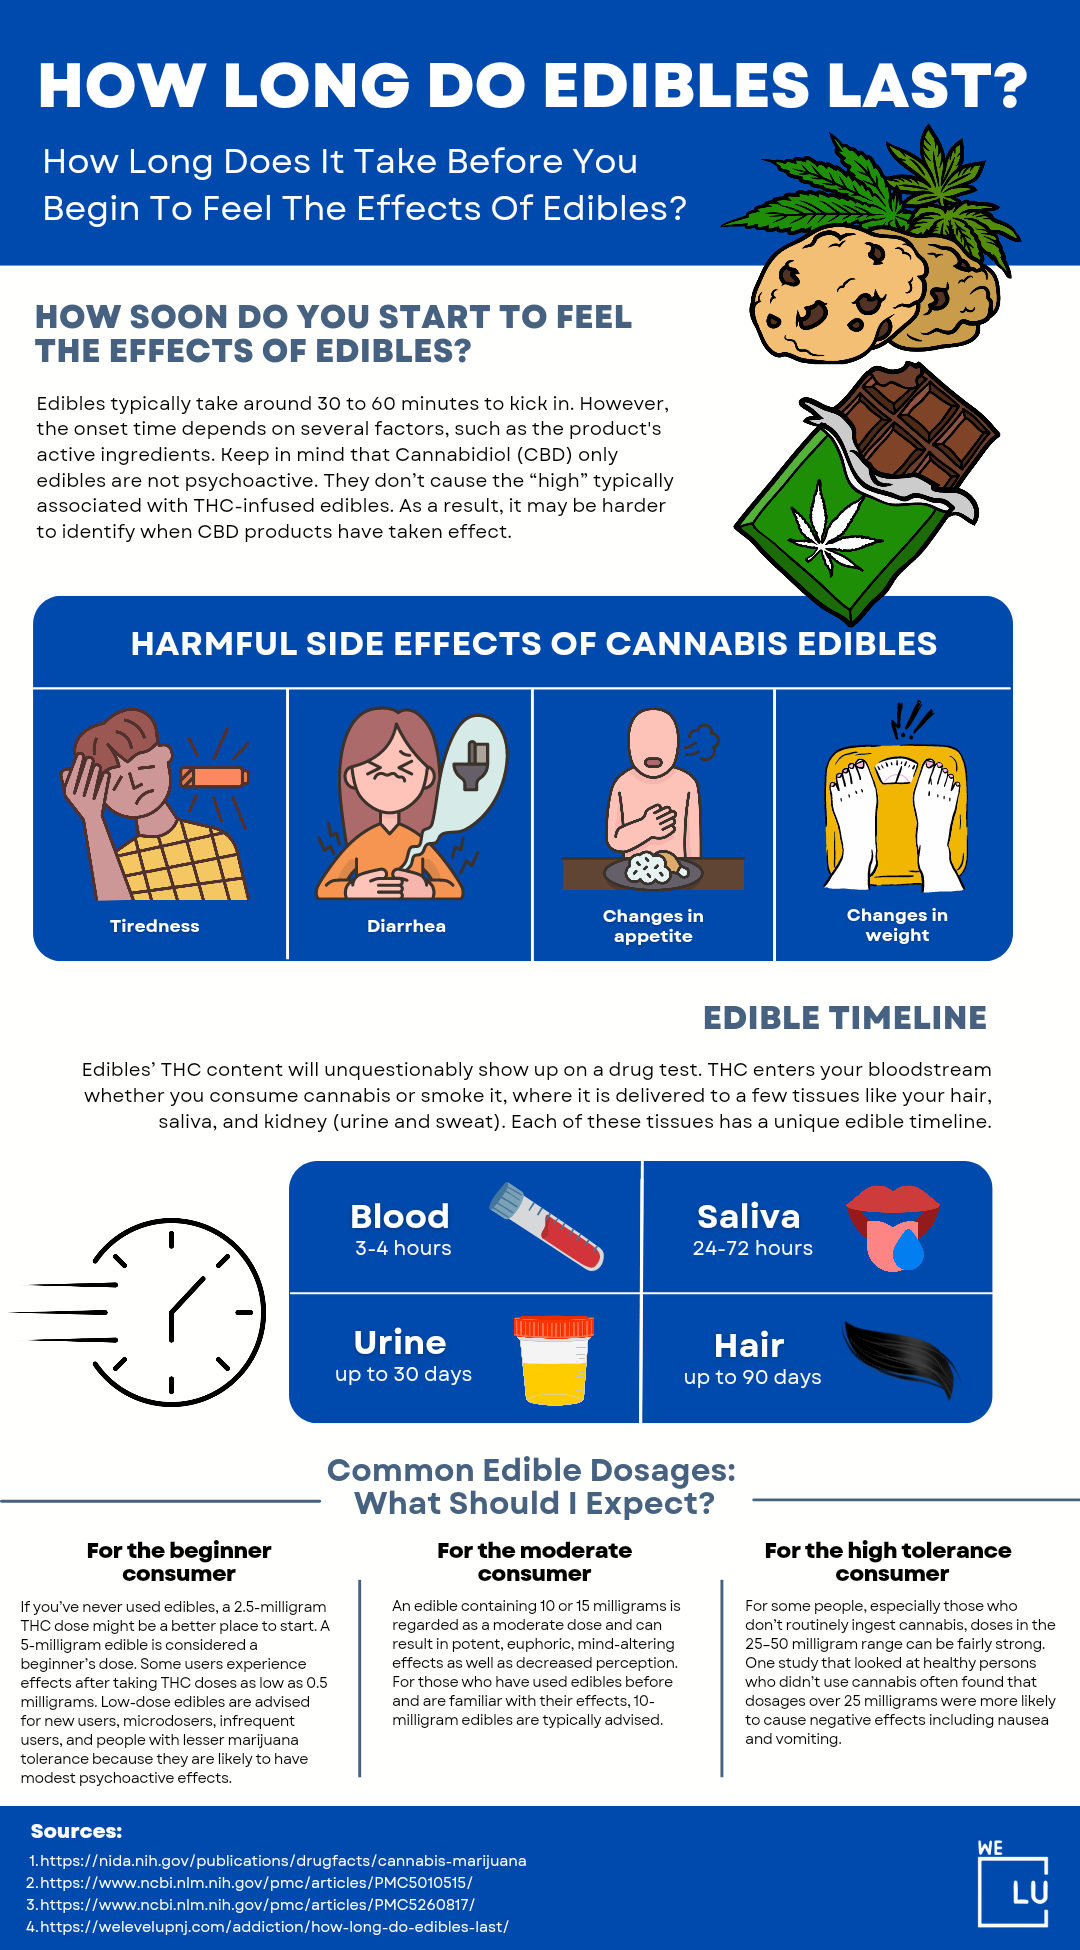 How long do edibles last? Many people feel the effects of edibles dissipate within 2 - 4 hours, some continue to feel high longer, for up to 12 - 24 hours after ingestion. On the balance, most edibles effects last from 4 - 8 hours.